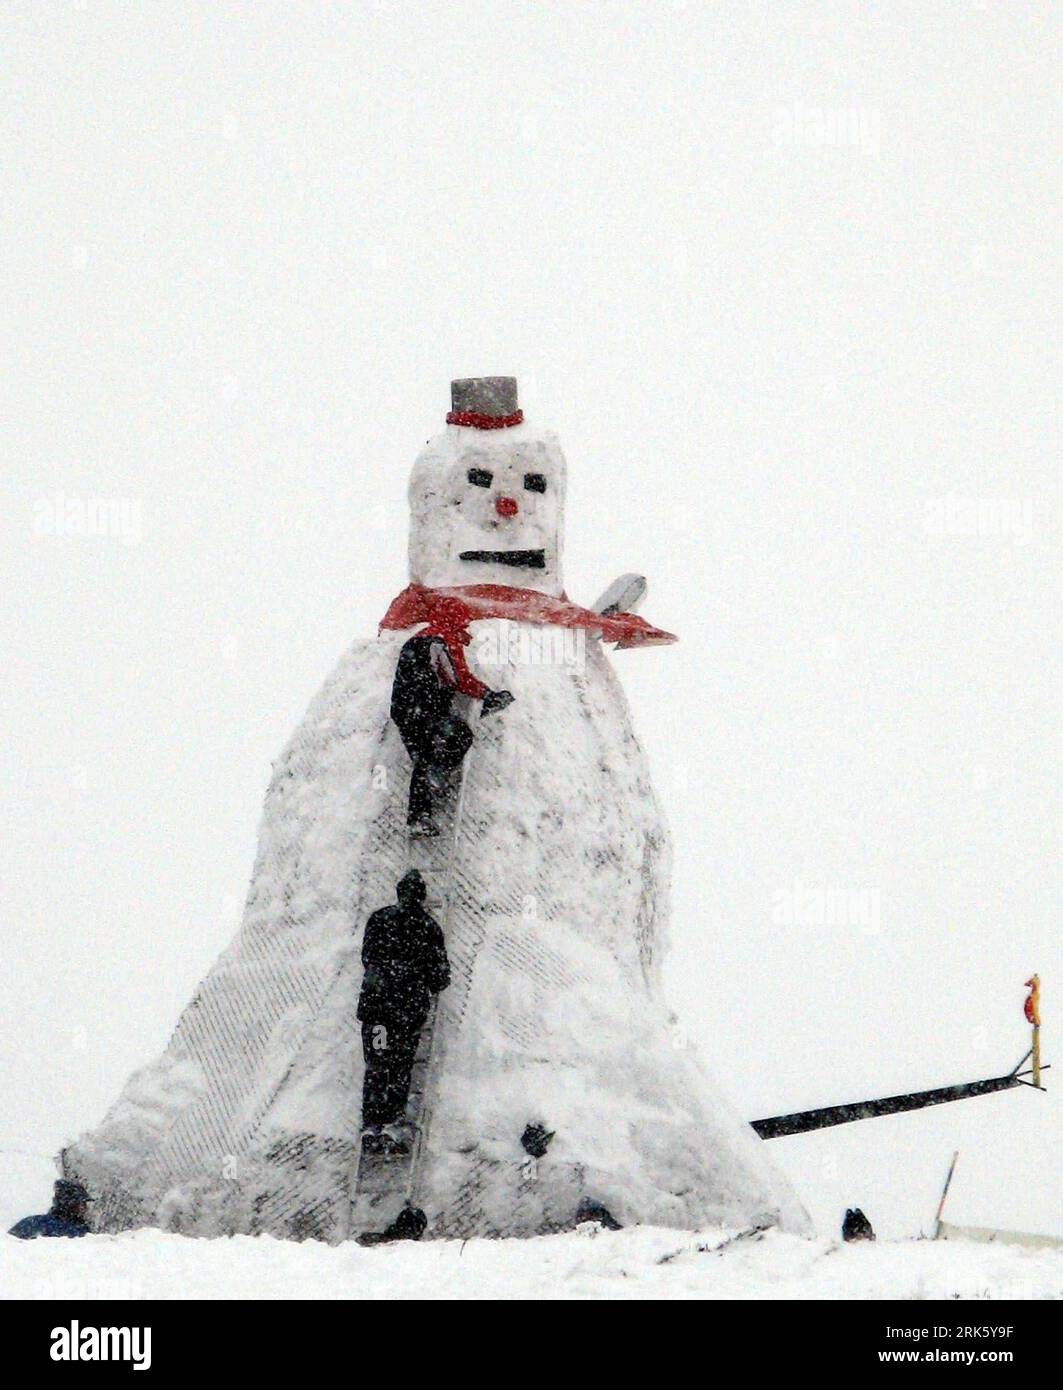 Bildnummer: 53770087  Datum: 31.01.2010  Copyright: imago/Xinhua (100201) -- JIU VALLEY, Feb. 1, 2010 (Xinhua) -- A snowman with a height of 8.1 meters is built by locals to celebrate the ongoing Snowman Festival in the resort Straja in Jiu Valley, central west Romania, Jan. 31, 2010. (Xinhua/Agerpres) (wh) (2)ROMANIA-SNOWMAN FESTIVAL-GIANT SNOWMAN PUBLICATIONxNOTxINxCHN kbdig xkg 2010 hoch  o0 Jahreszeit Winter Schneemann    Bildnummer 53770087 Date 31 01 2010 Copyright Imago XINHUA 100201 Jiu Valley Feb 1 2010 XINHUA a Snowman With a Height of 8 1 METERS IS built by Locals to Celebrate The o Stock Photo